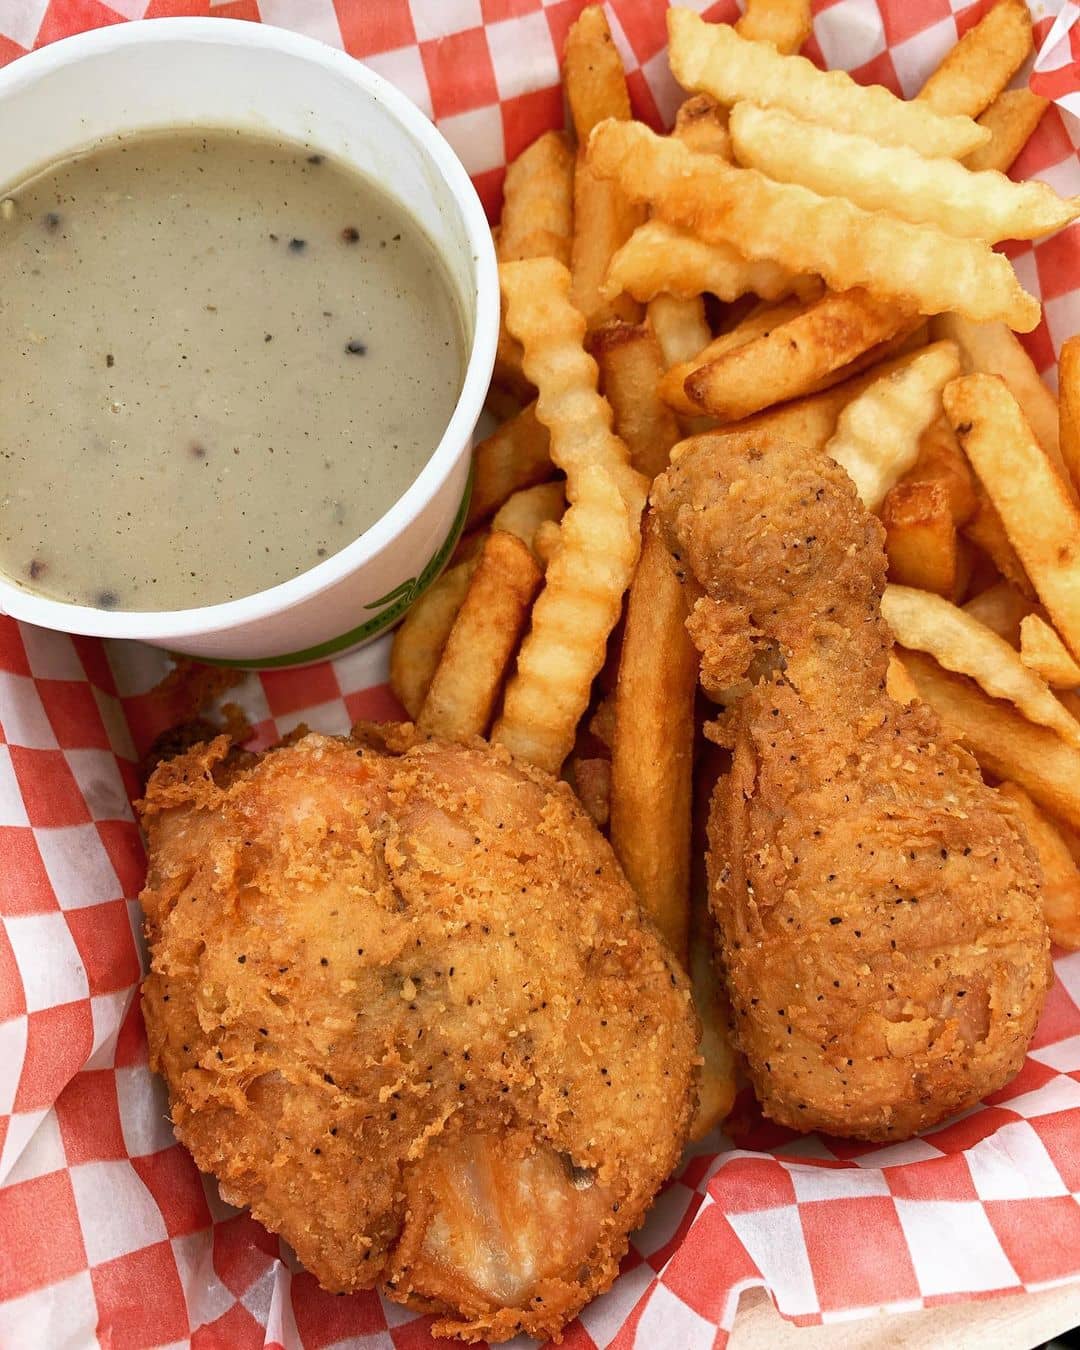 best squamish restaurants - mag's 99 fried chicken and fries and gravy